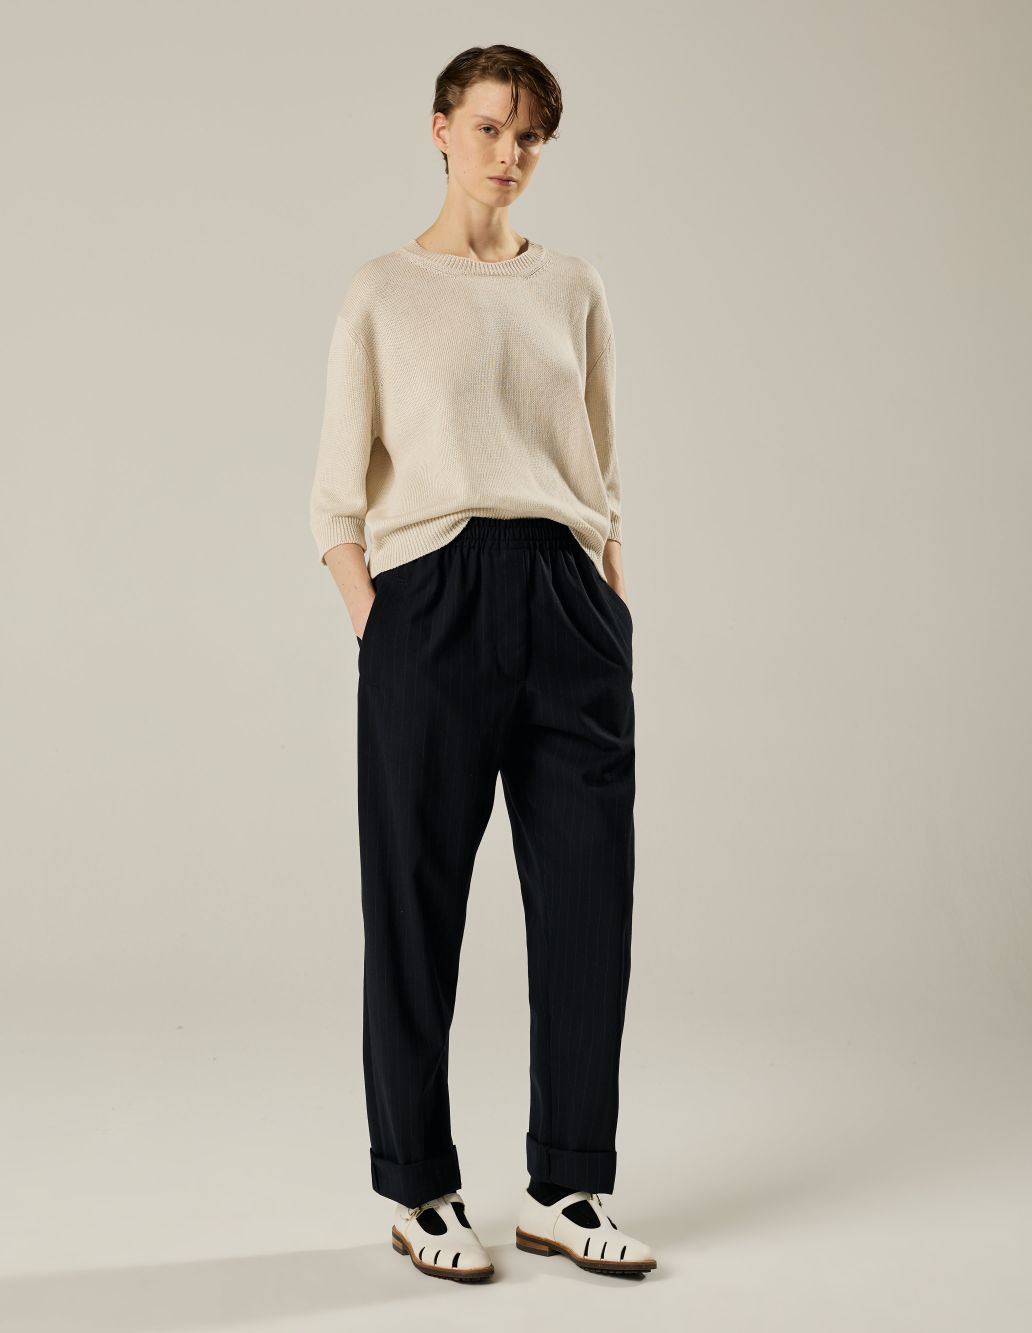 Beige Trousers  PullOn Trousers  Beige High Waisted Pants  Lulus